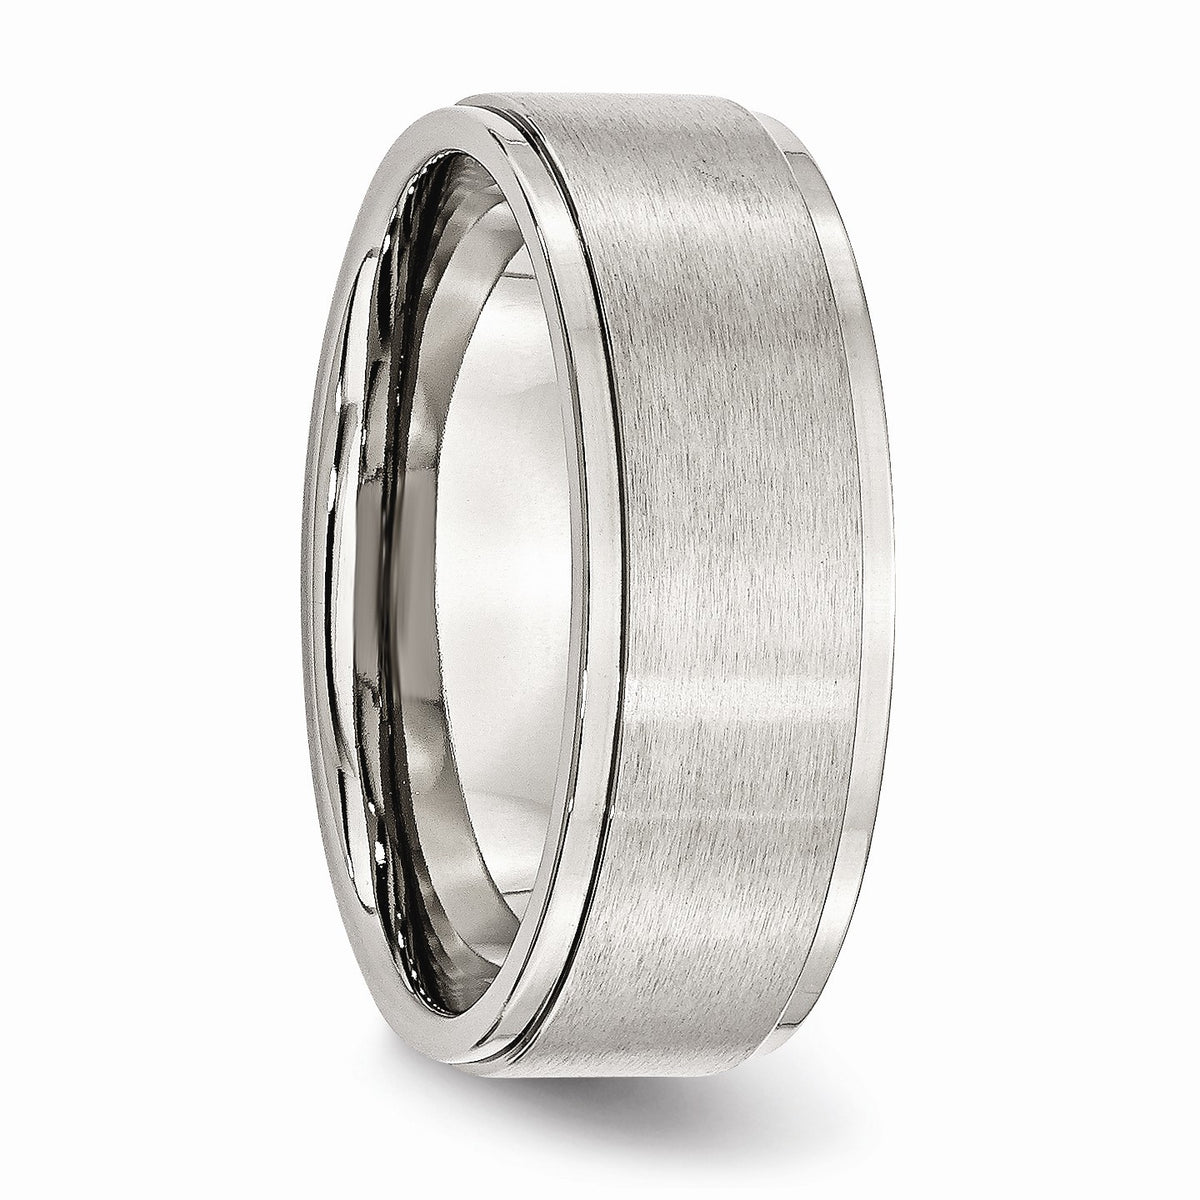 Alternate view of the 8mm Stainless Steel Ridged Edge Dual Finished Comfort Fit Band by The Black Bow Jewelry Co.